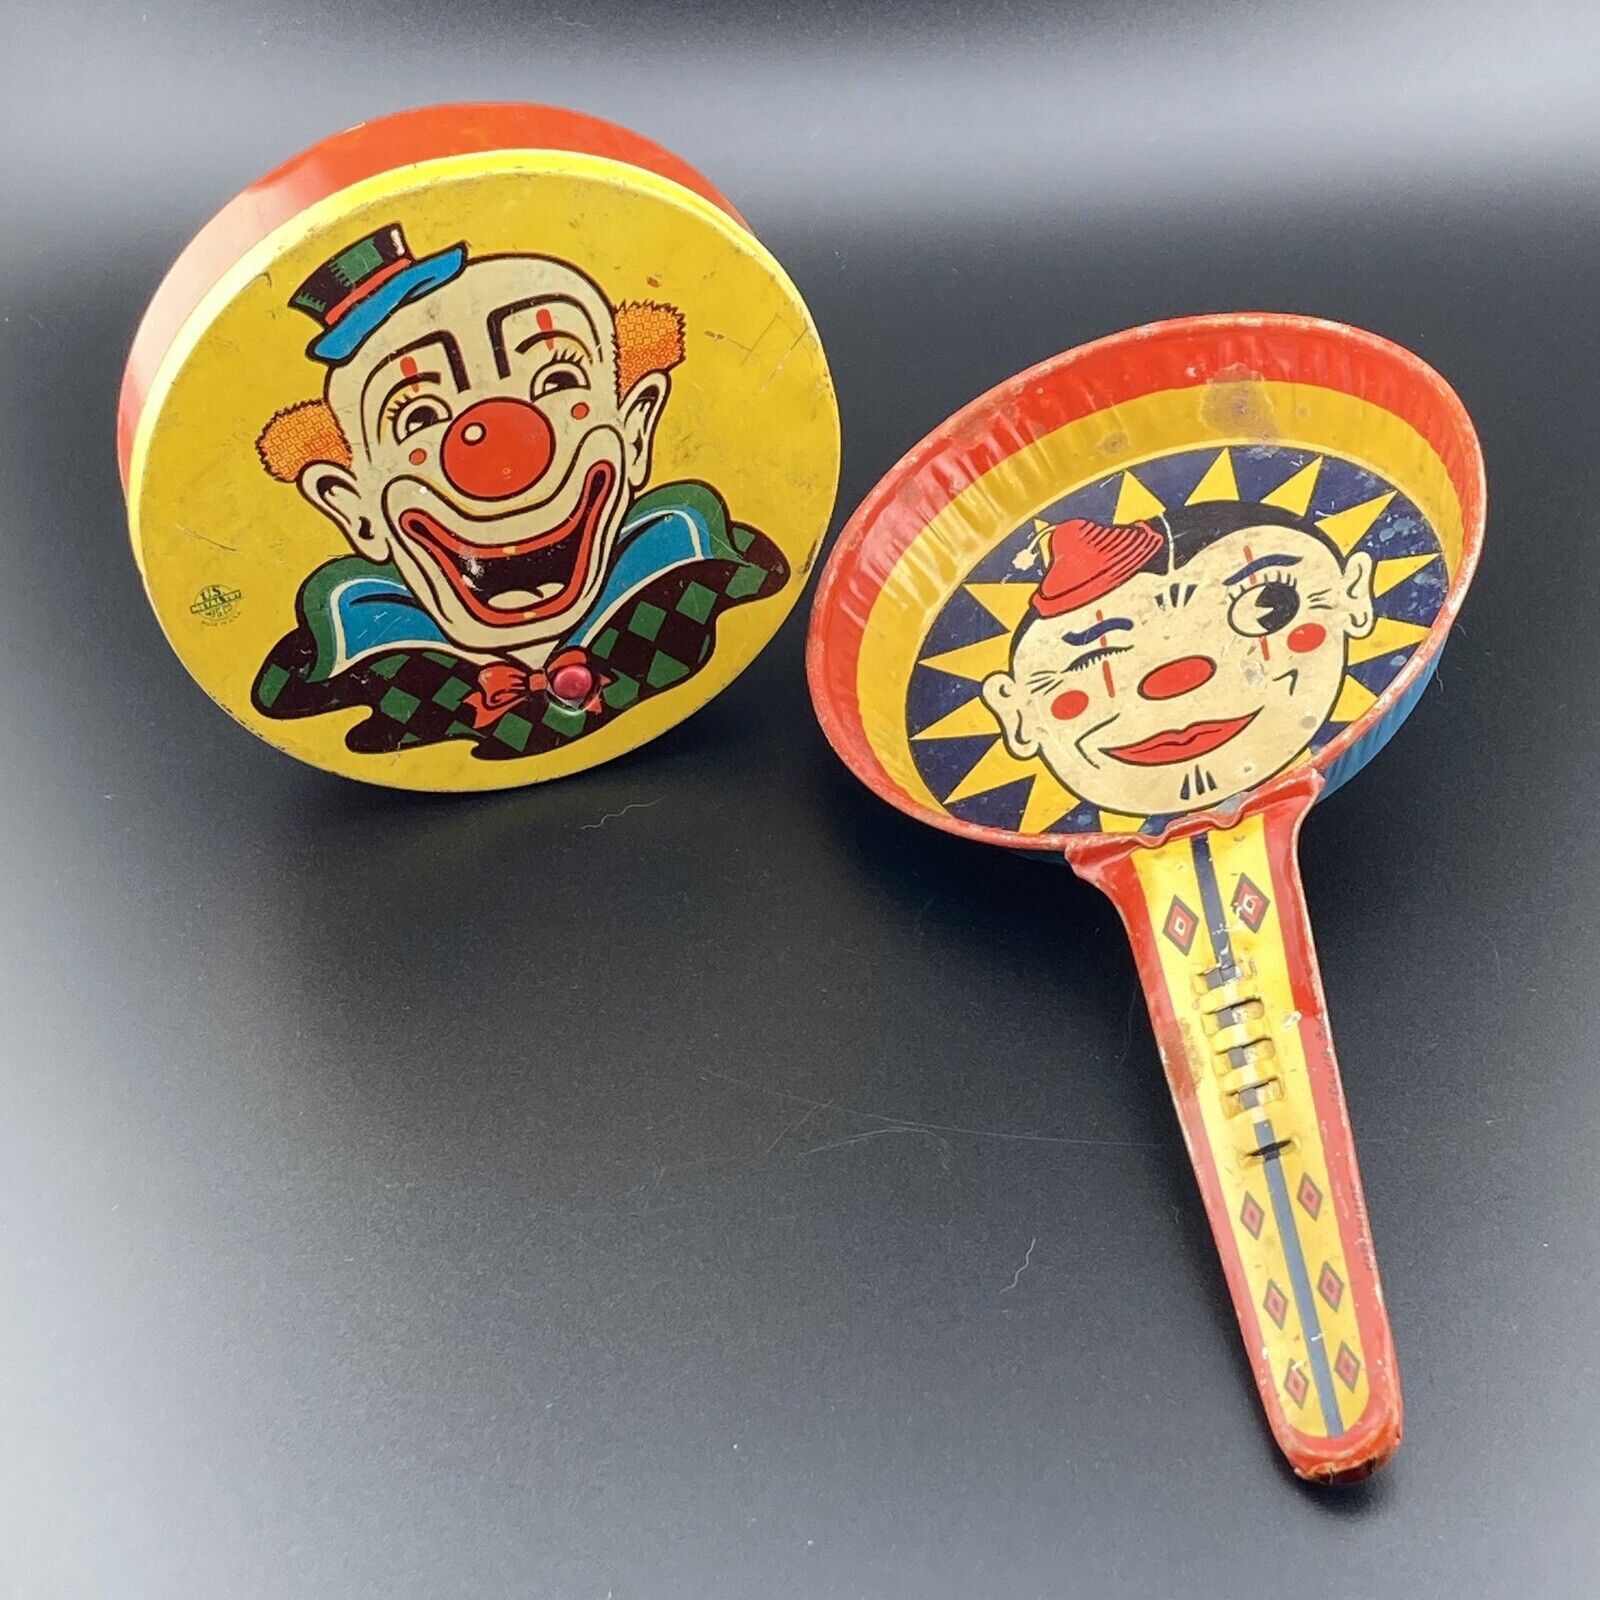 Kirchhof Life of the Party Winking Clown Clacker US Toy Mfg Co Spin Ratchet VTG